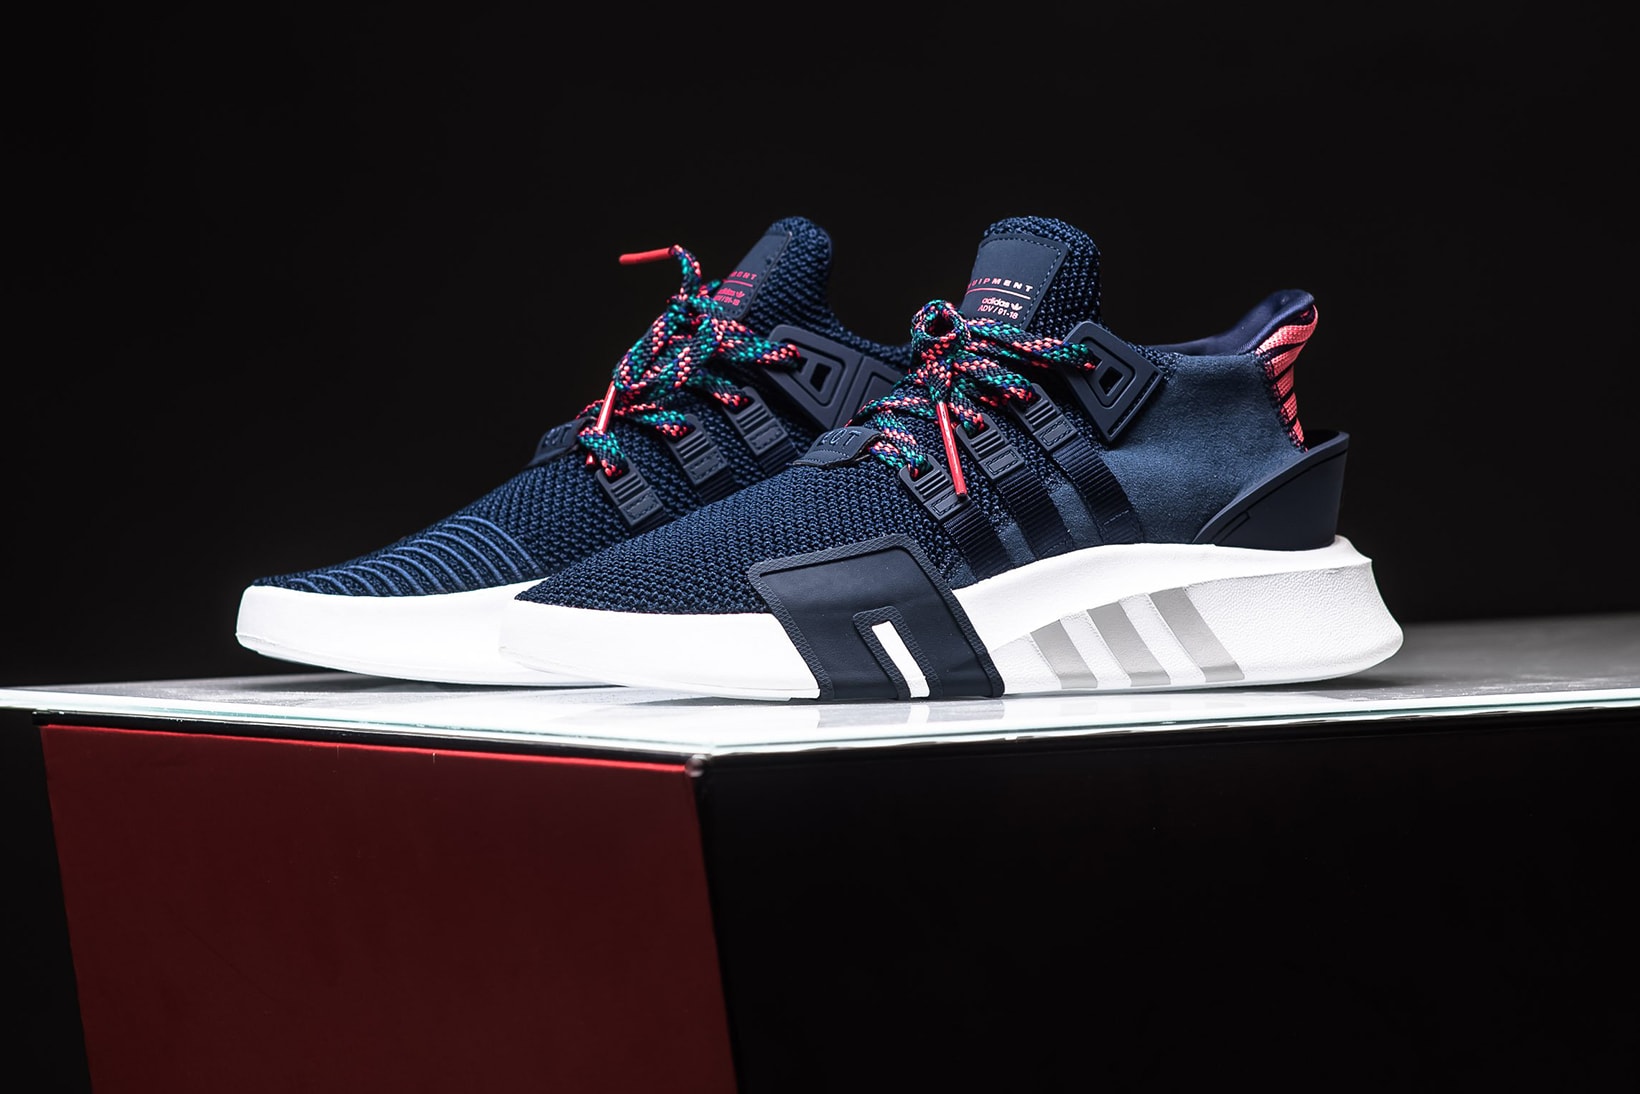 adidas Originals EQT BBall ADV Navy Real Coral 2018 february 1 release date info sneakers shoes footwear politics CQ2996